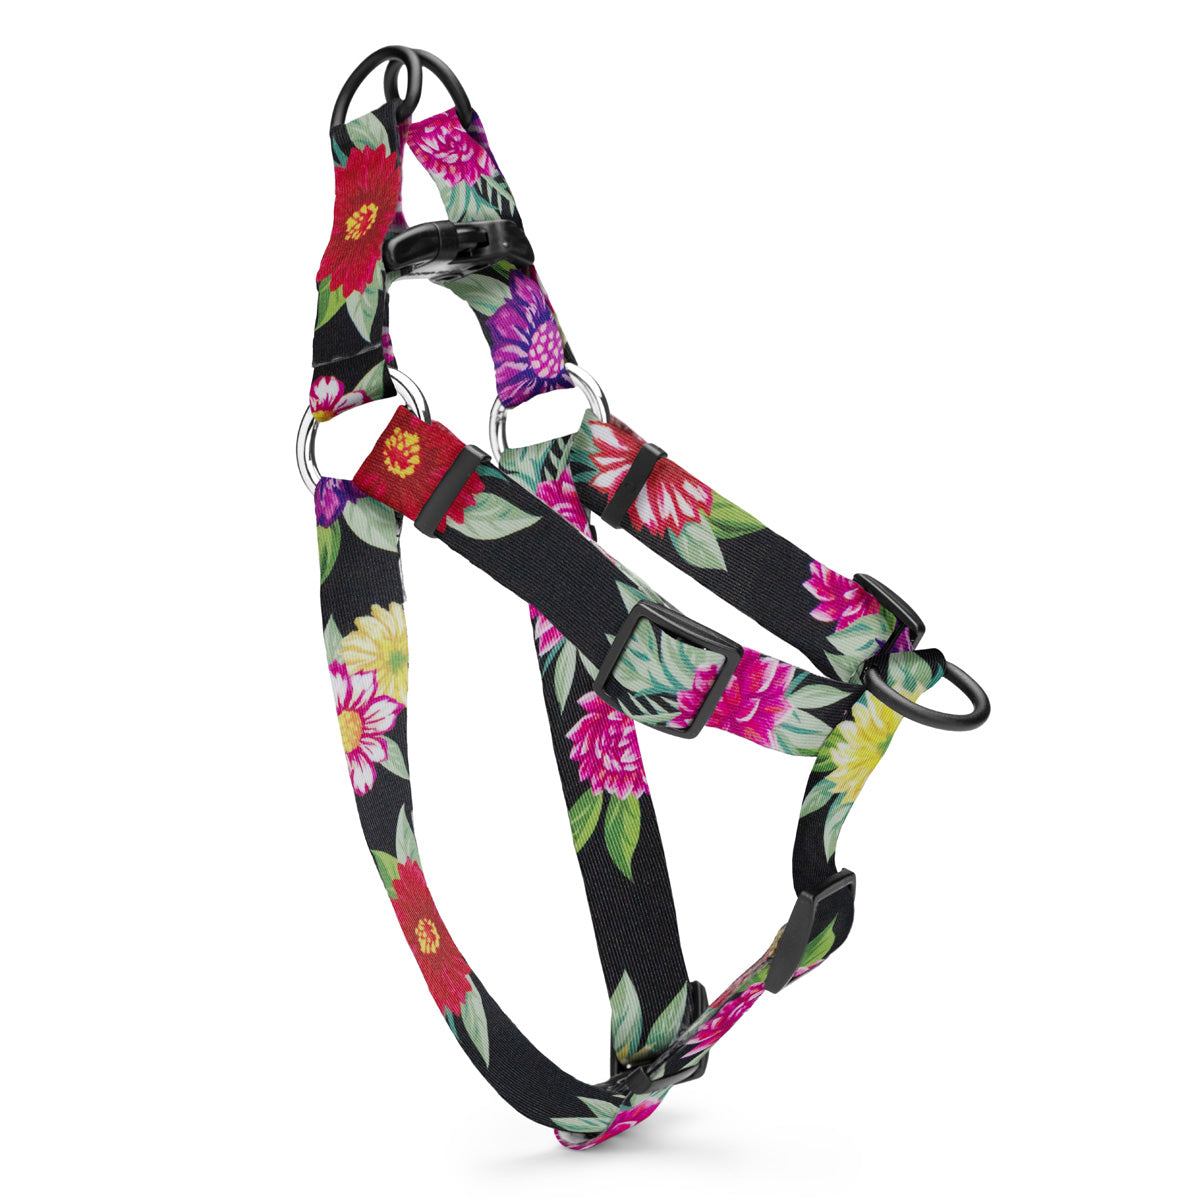 Colorful floral designs on a black background, on a harness.